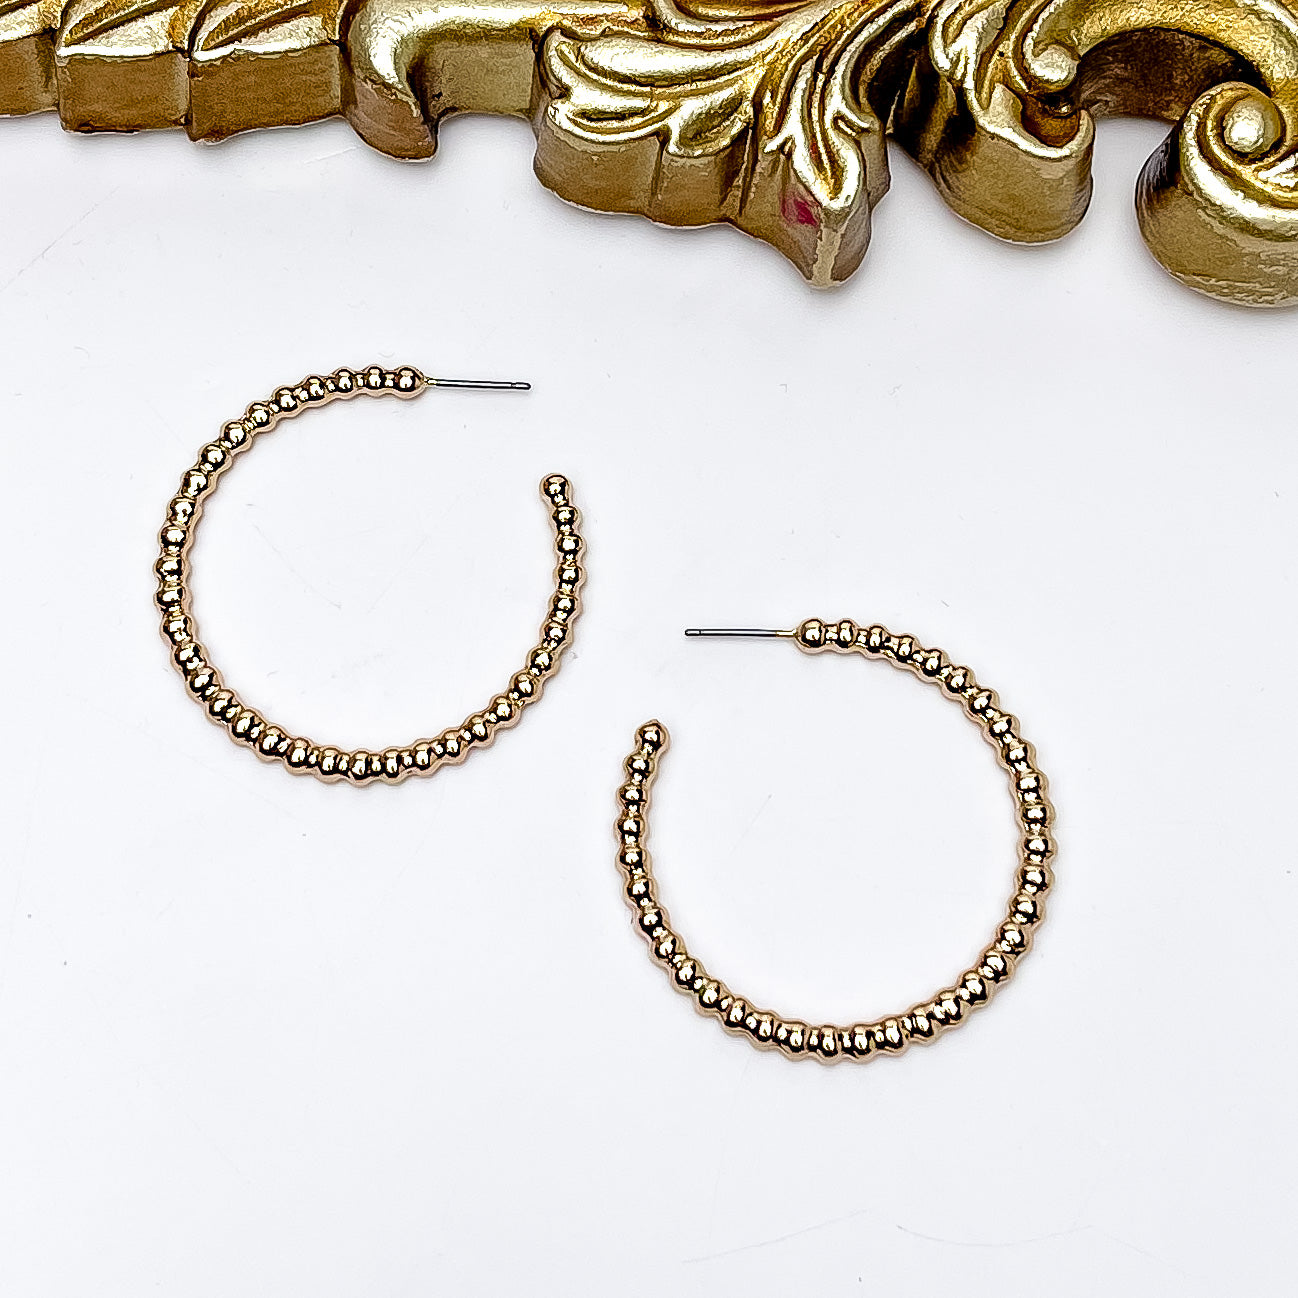 Gold Tone Connecting Beads Hoop Earrings. Pictured on a white background with a gold frame above the earrings.